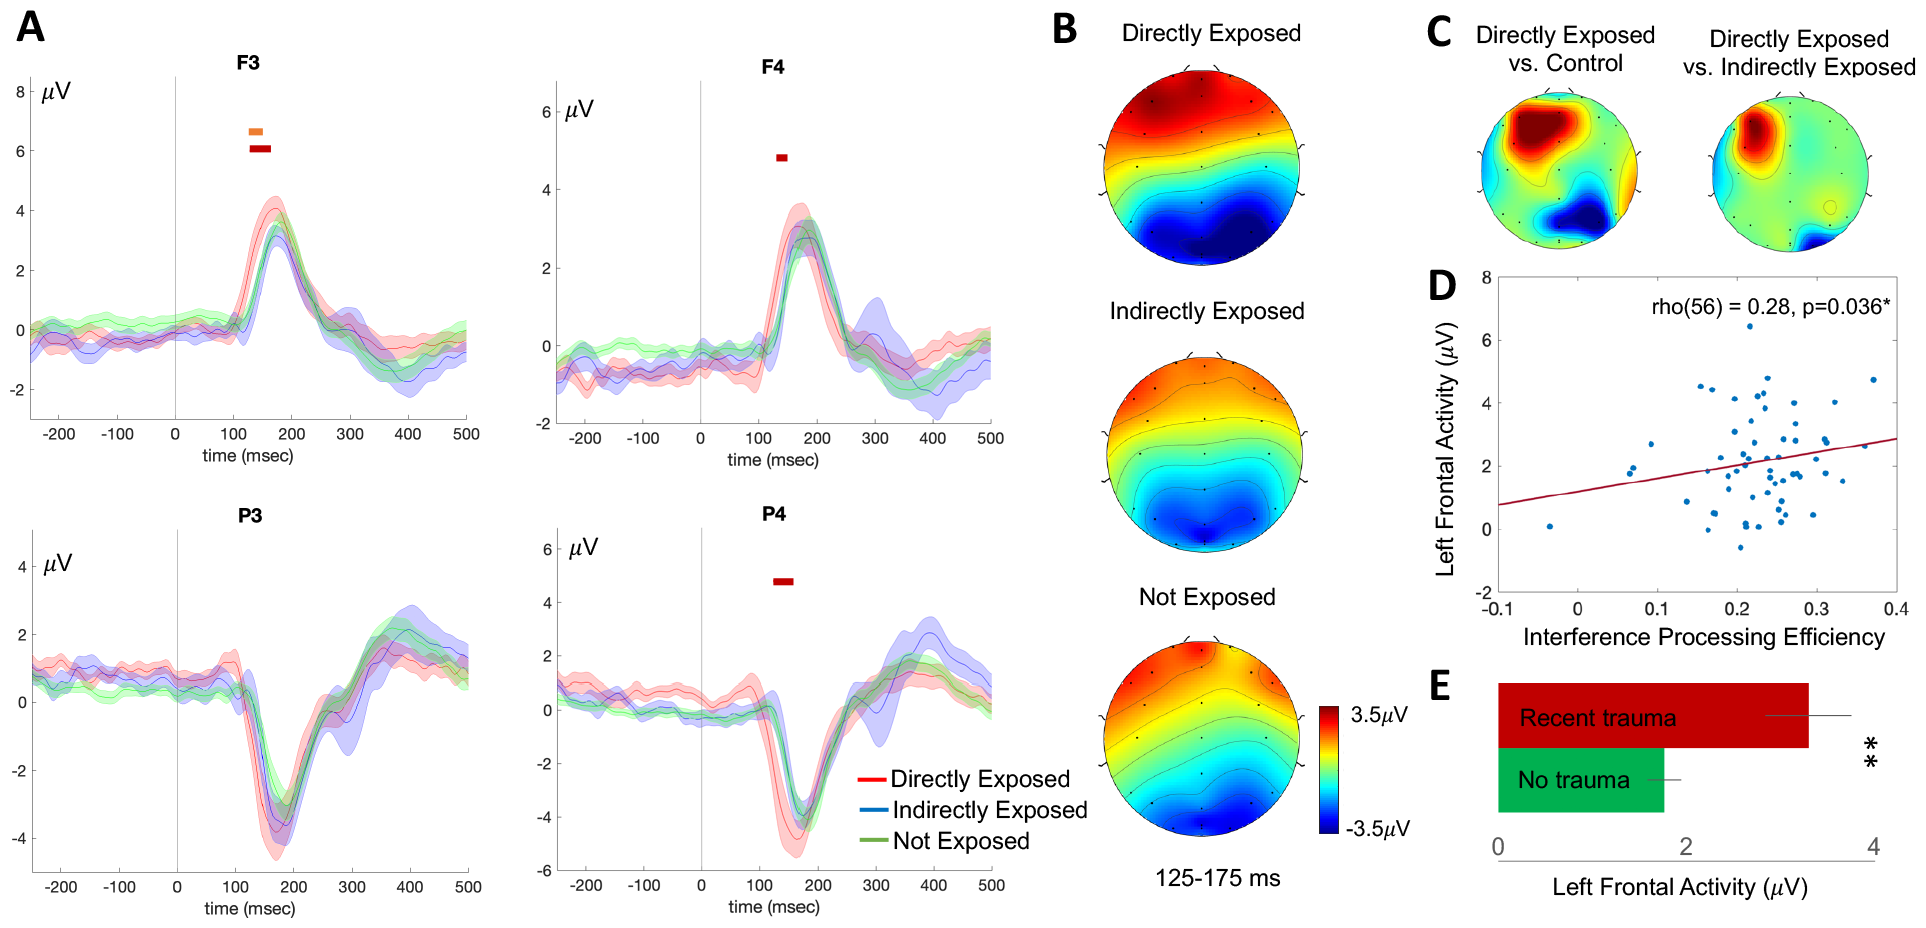 Cognitive differences between groups of people who were directly exposed to the Camp Fire in 2018, people who were indirectly exposed (who witnessed the fire but were not directly impacted), and age- and gender-matched non-exposed controls. Event-related potential responses (ERPs) elicited on the interference processing task and their relationship to behavior. (A) Group averaged ERPs ± standard error are shown at frontal (F3, F4) and parietal (P3, P4) channels corresponding to the directly exposed (red), indirectly exposed (blue) and unexposed control (green) groups. Red and orange bars depict significant peak amplitude differences between the directly exposed vs. control group, and the directly exposed vs. indirectly exposed group (p